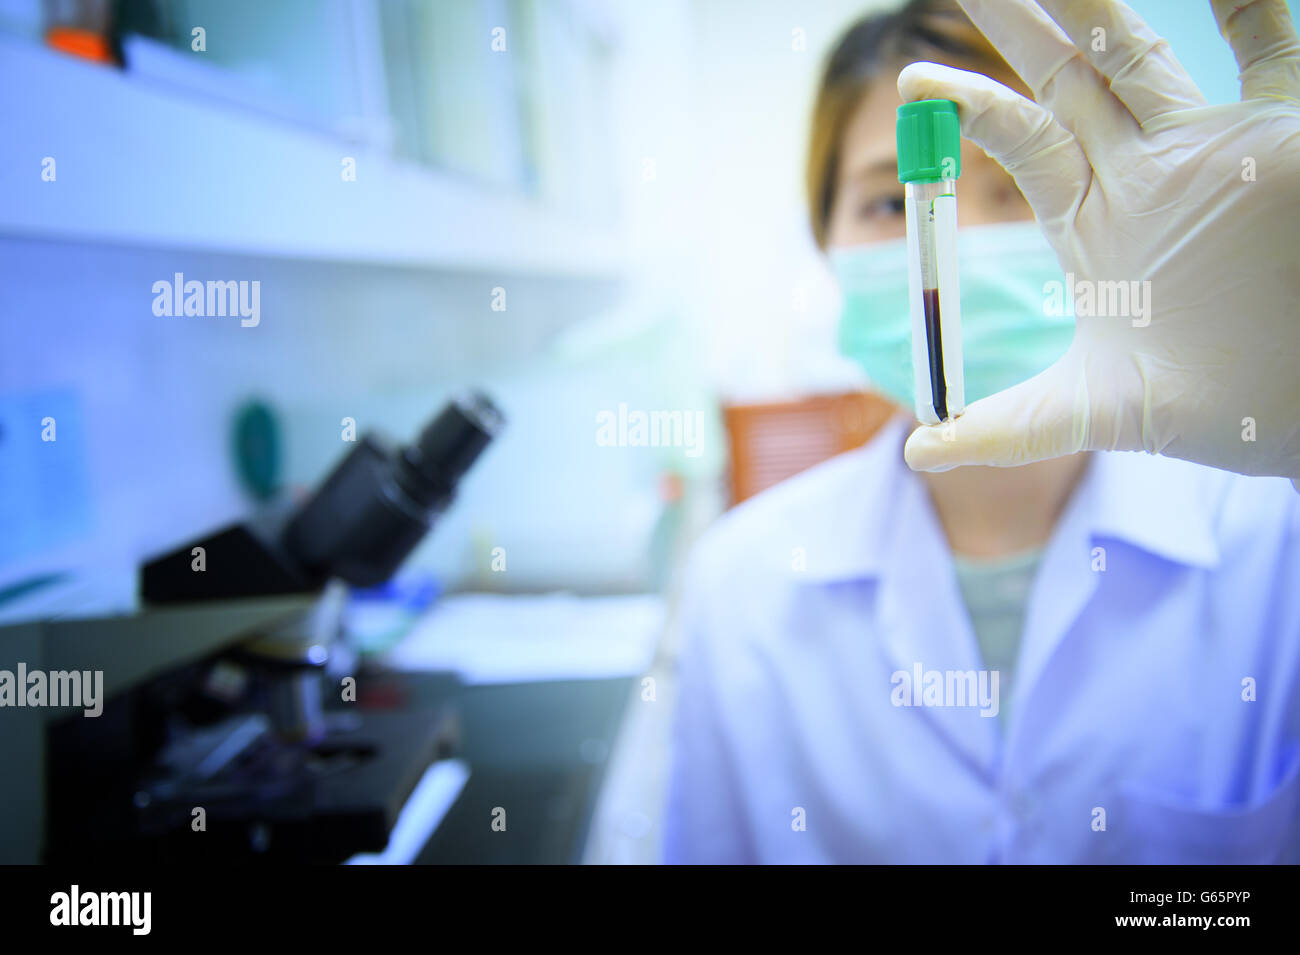 blood test tube in asia doctor hand Stock Photo